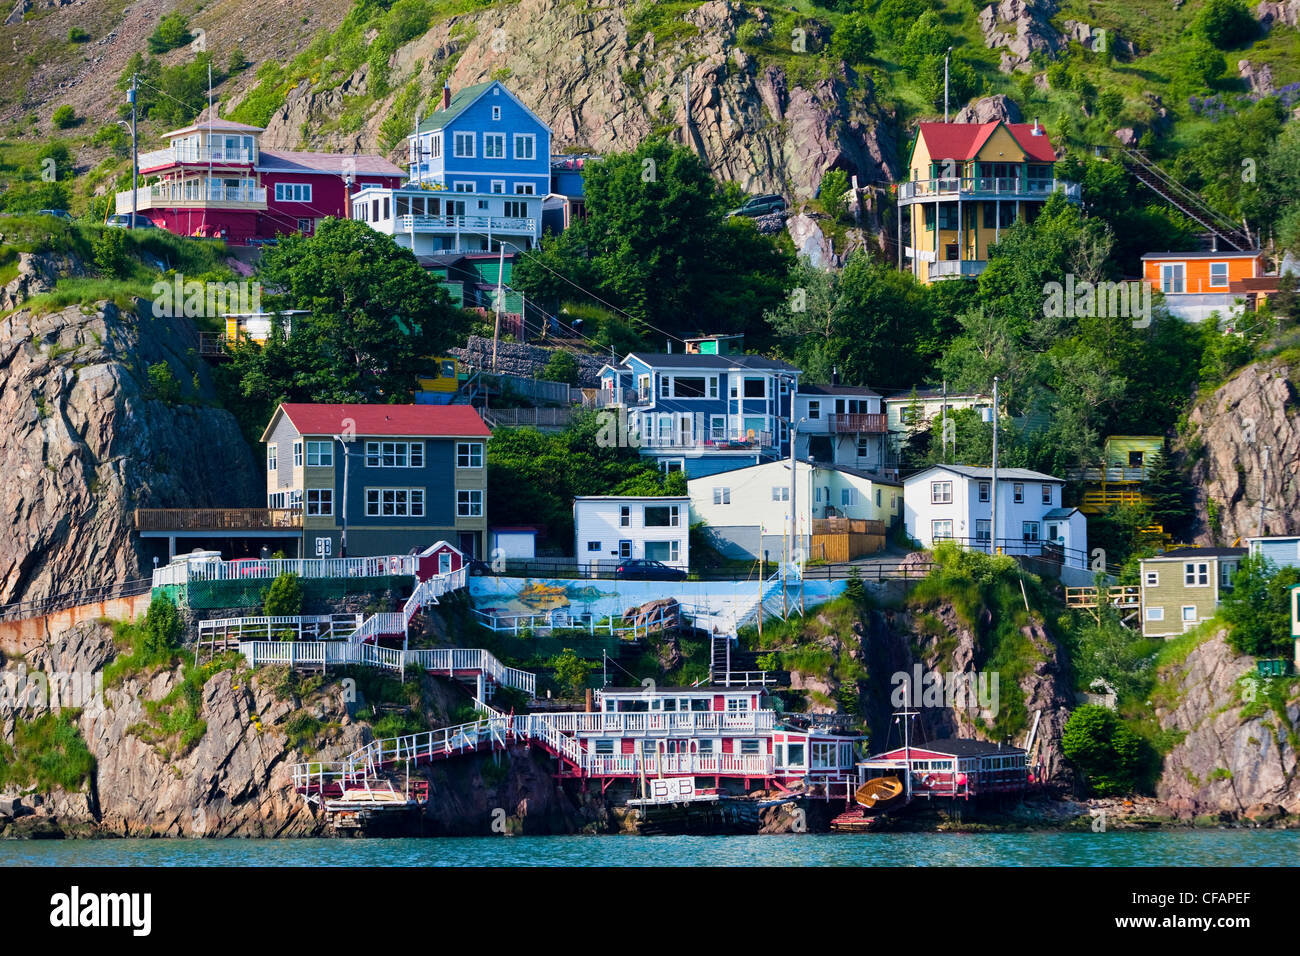 The Battery, St. John's Harbour, Newfoundland and Labrador, Canada. Stock Photo